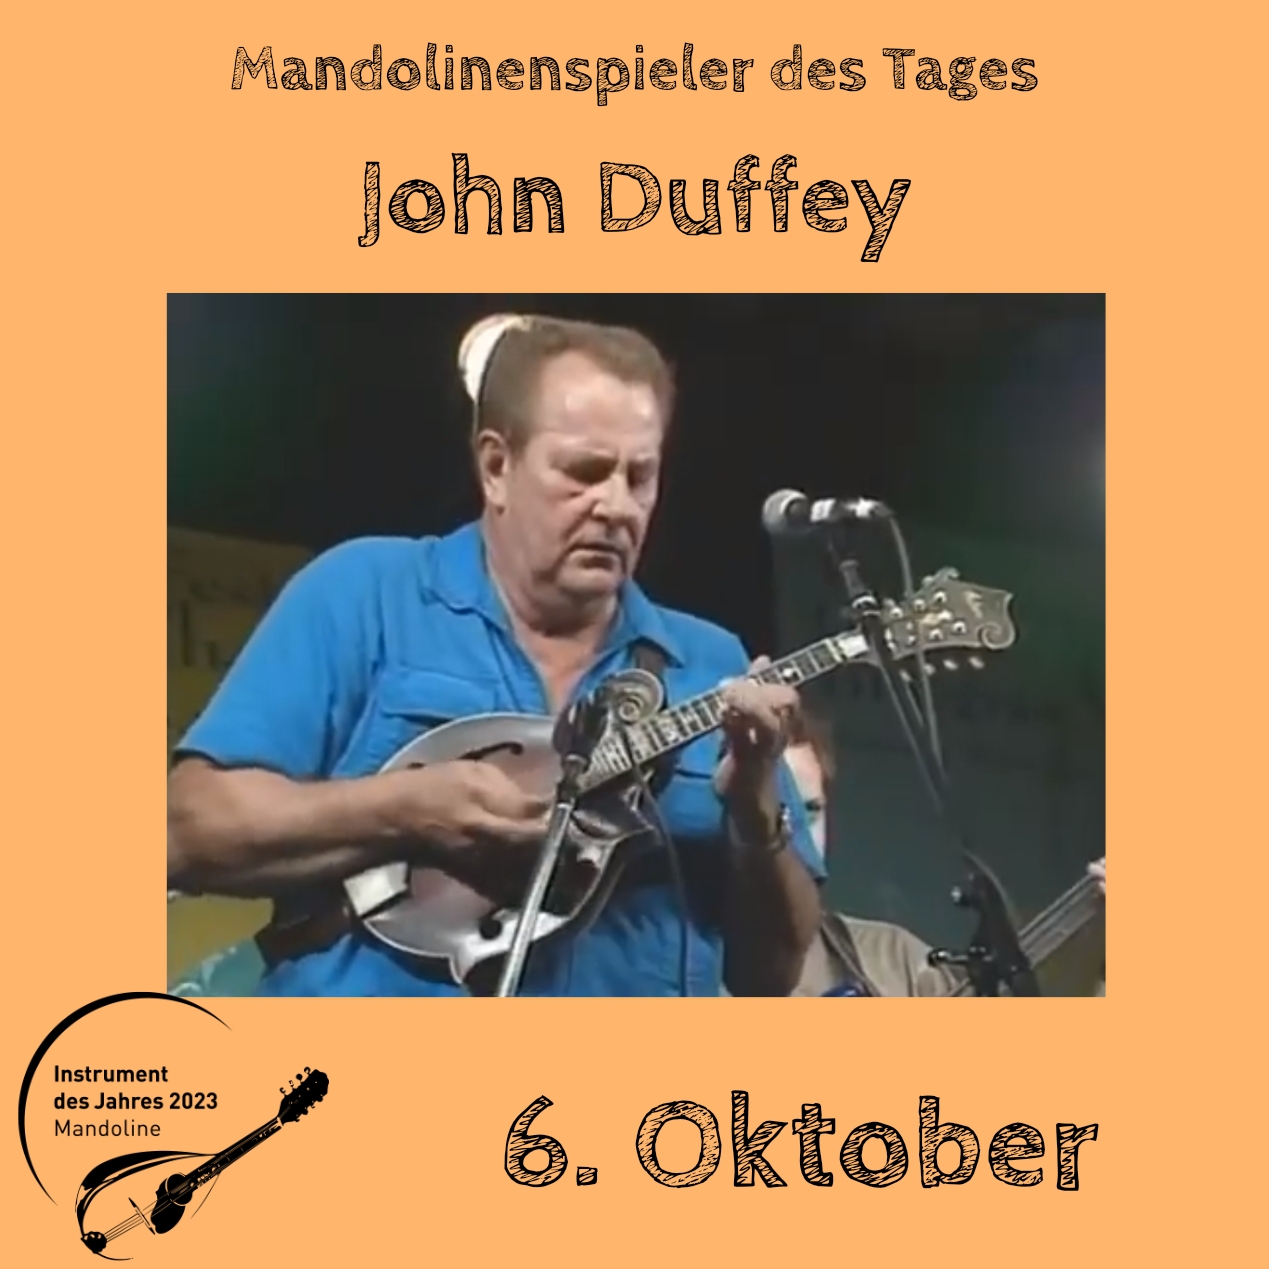 You are currently viewing 6. Oktober – John Duffey